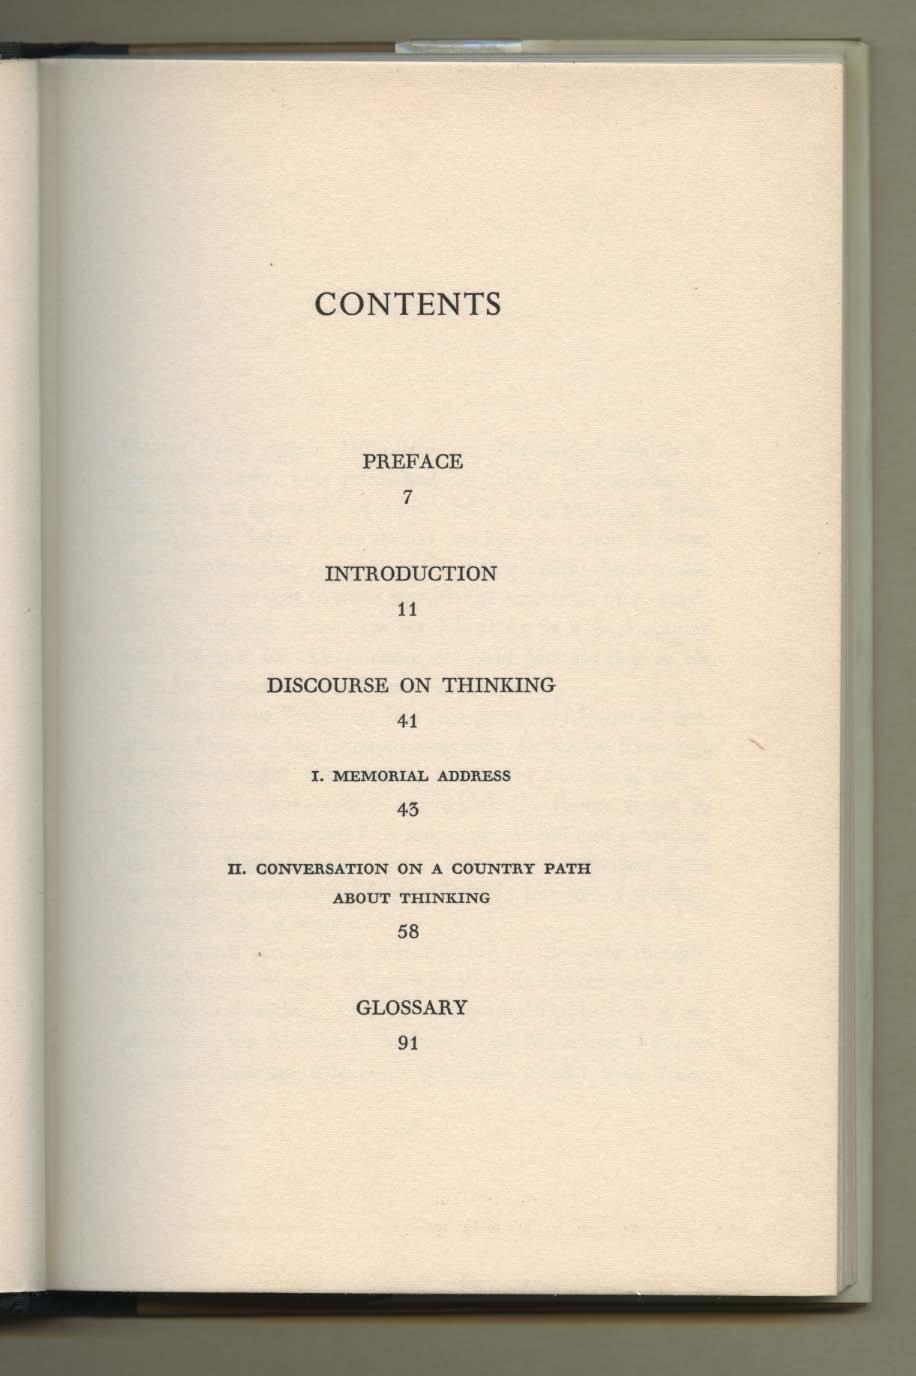 CONTENTS PREFACE 7 INTRODUCTION 11 DISCOURSE ON THINKING 41 I.